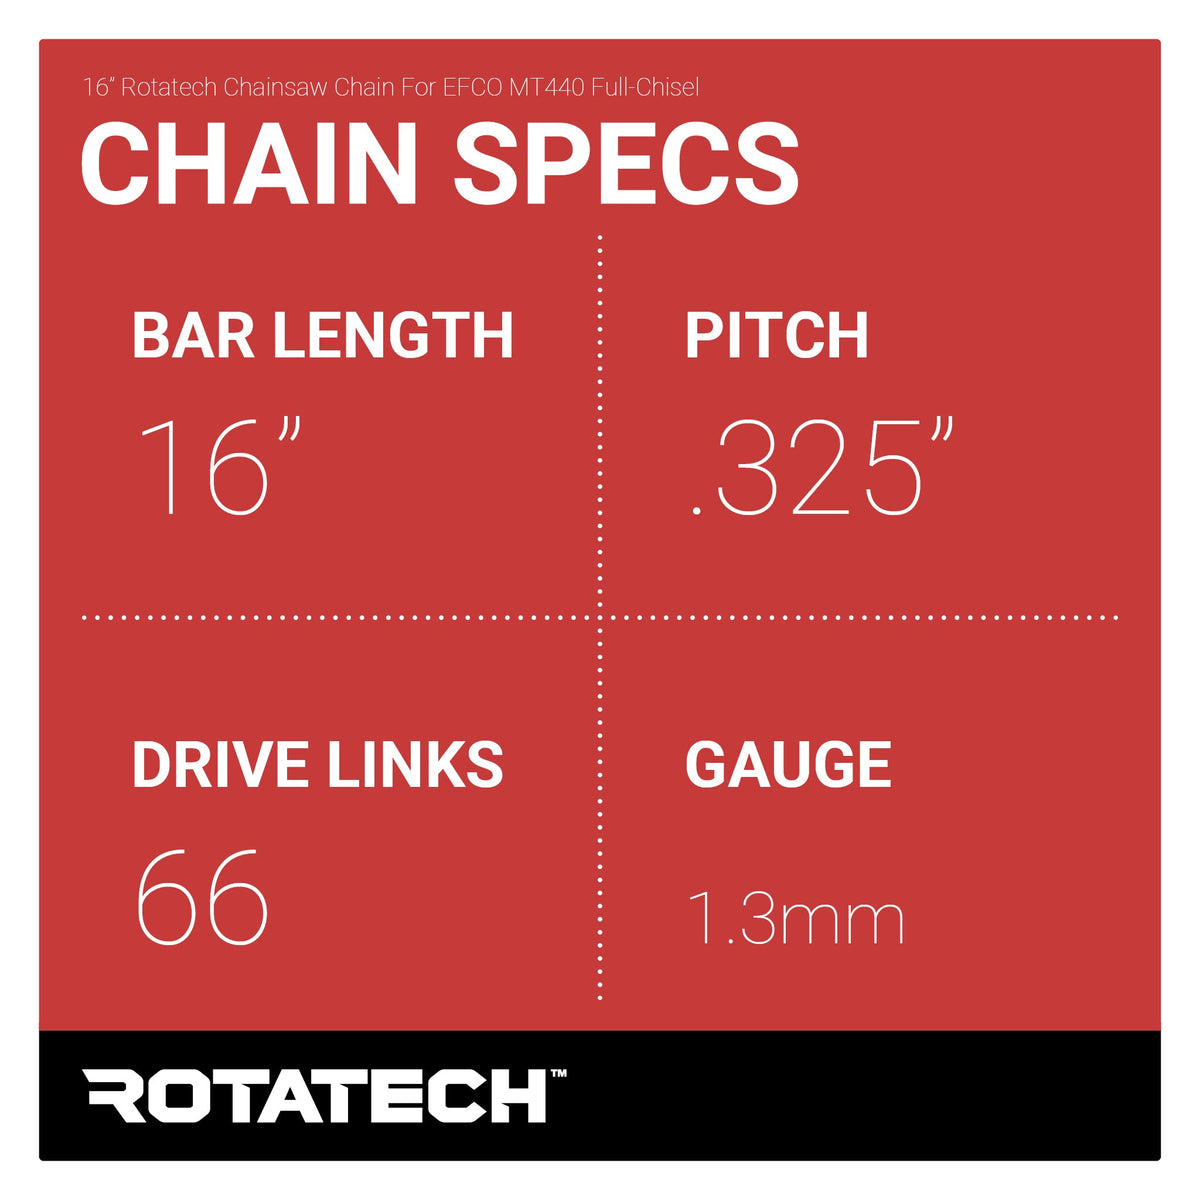 16" Rotatech Chainsaw Chain For EFCO MT440 Full-Chisel Chain Specs